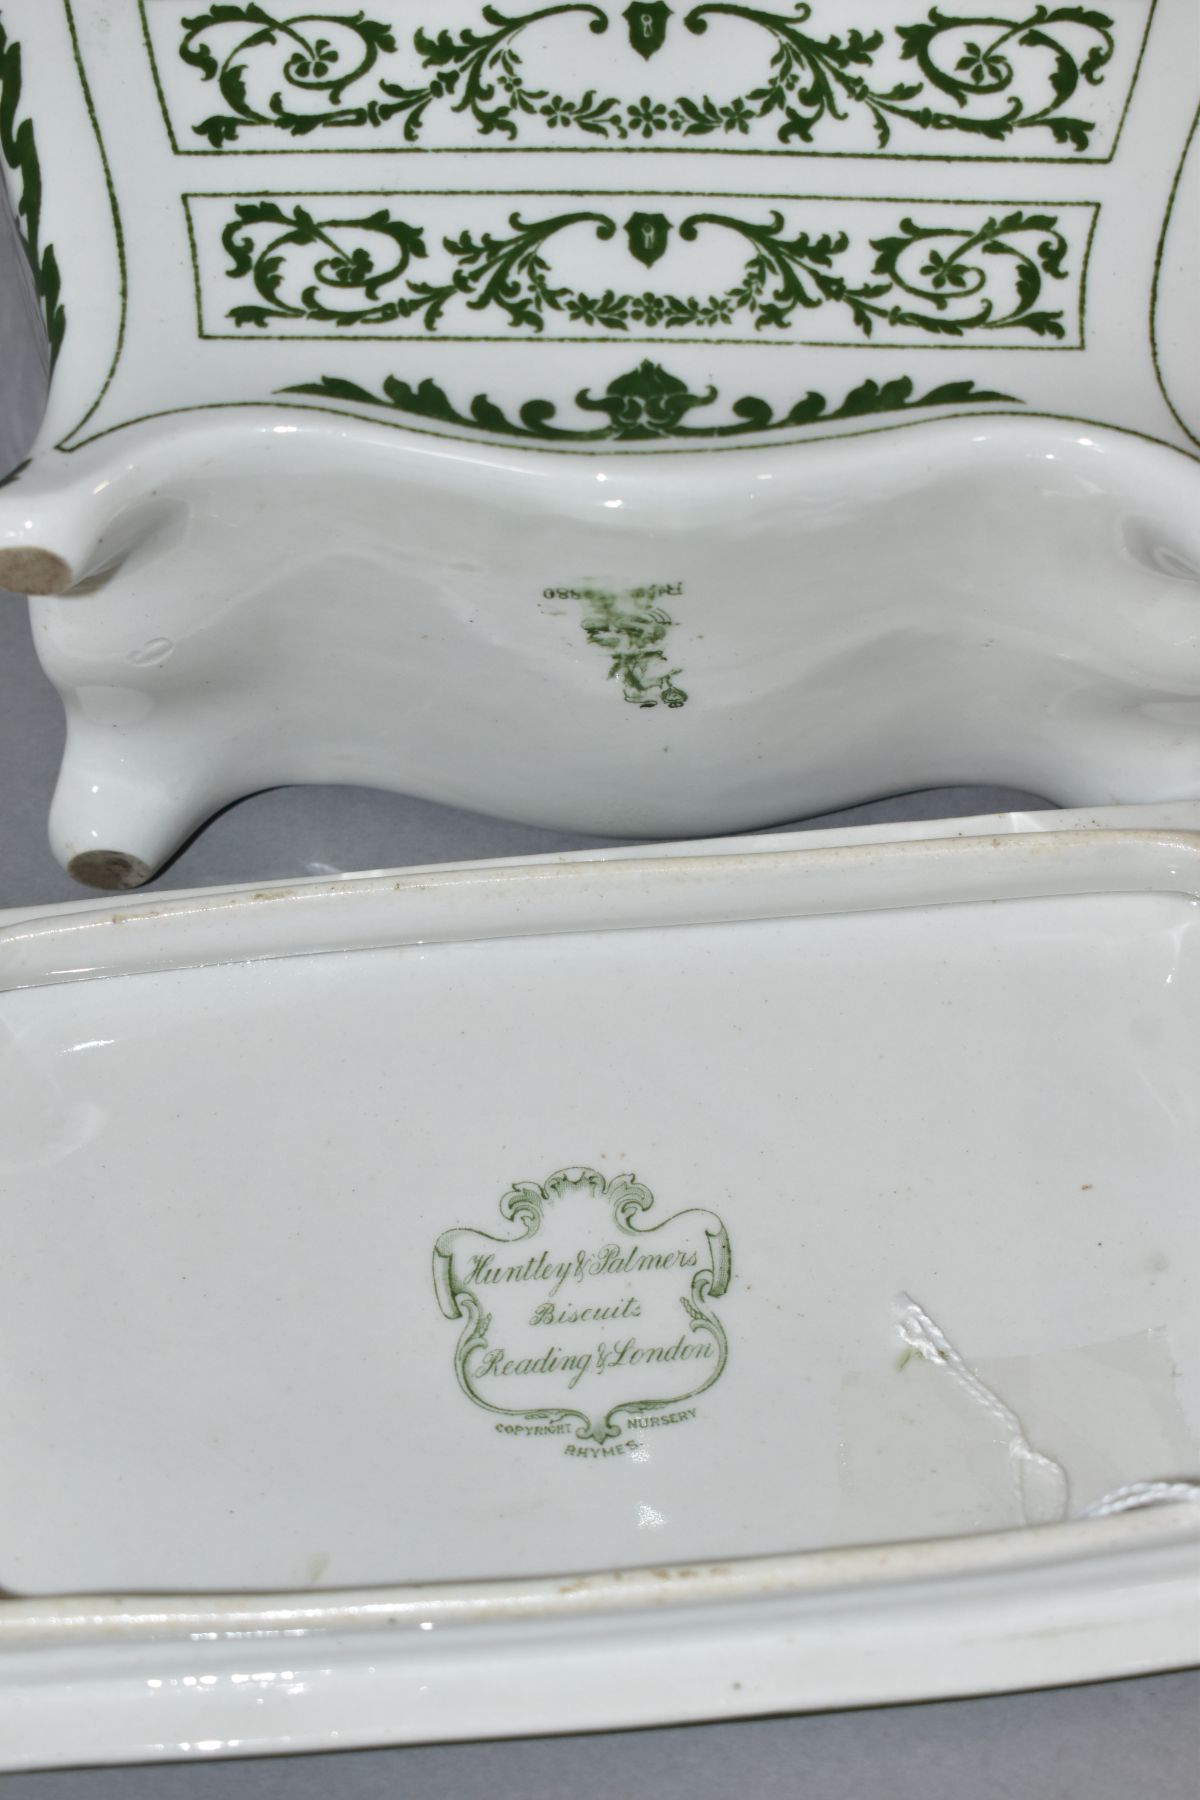 A ROYAL DOULTON NURSERY RHYMES 'A' SERIES WARE HUNTLEY & PALMERS BISCUIT CASKET IN THE FORM OF A - Image 6 of 7